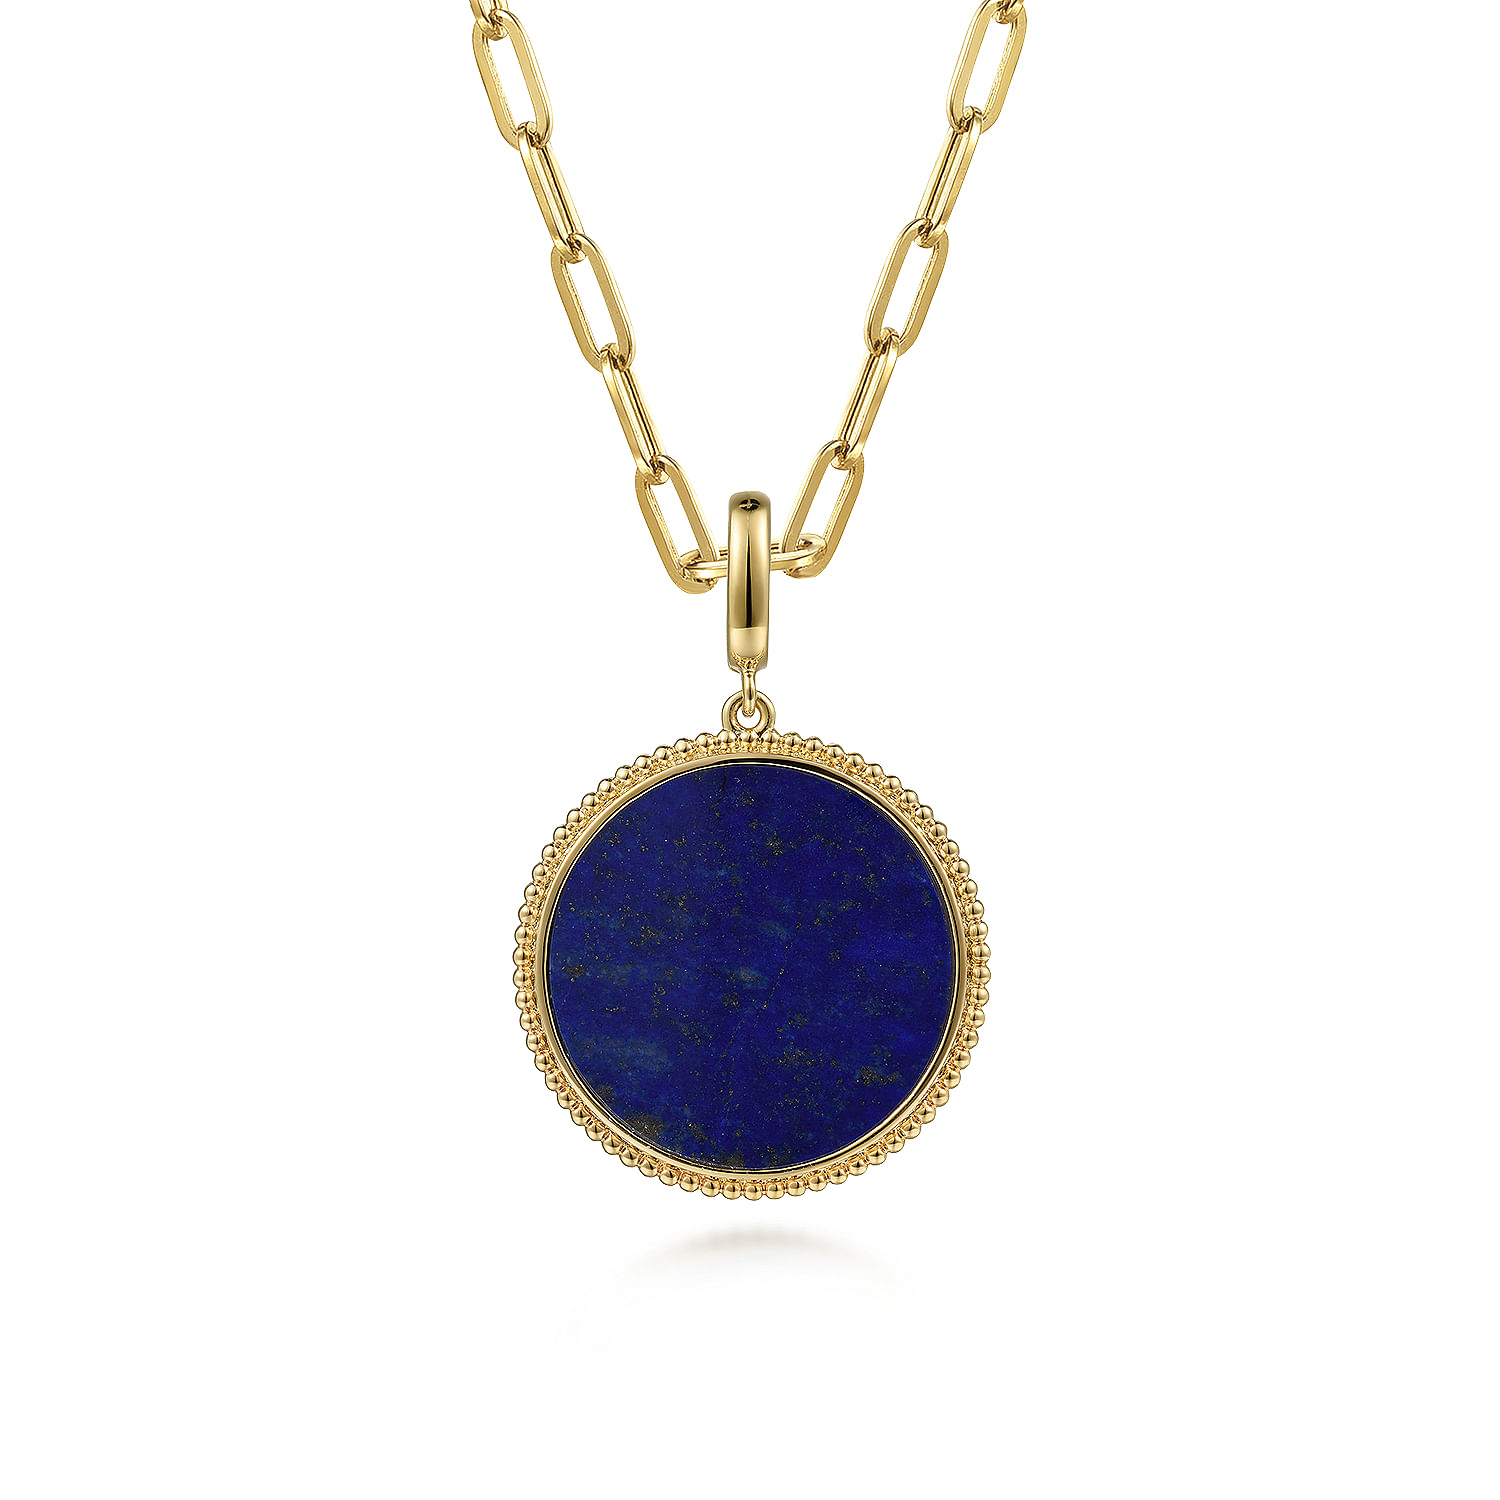 14K Yellow Gold Round Lapis Inlay Medallion Pendant in size 24mm